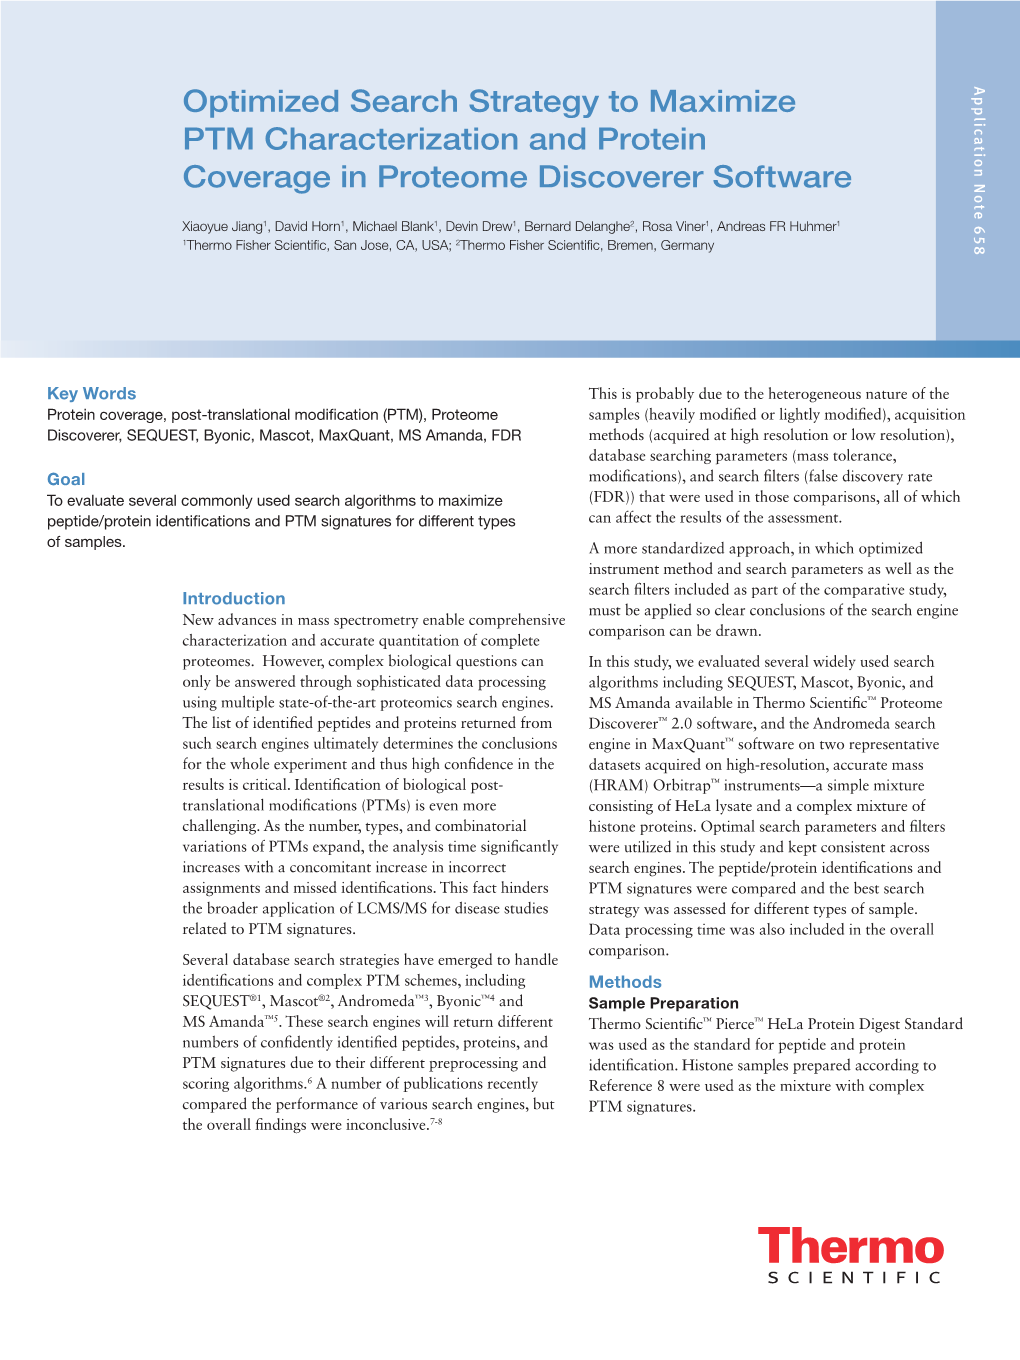 Optimized Search Strategy to Maximize PTM Characterization and Protein Coverage in Proteome Discoverer Software